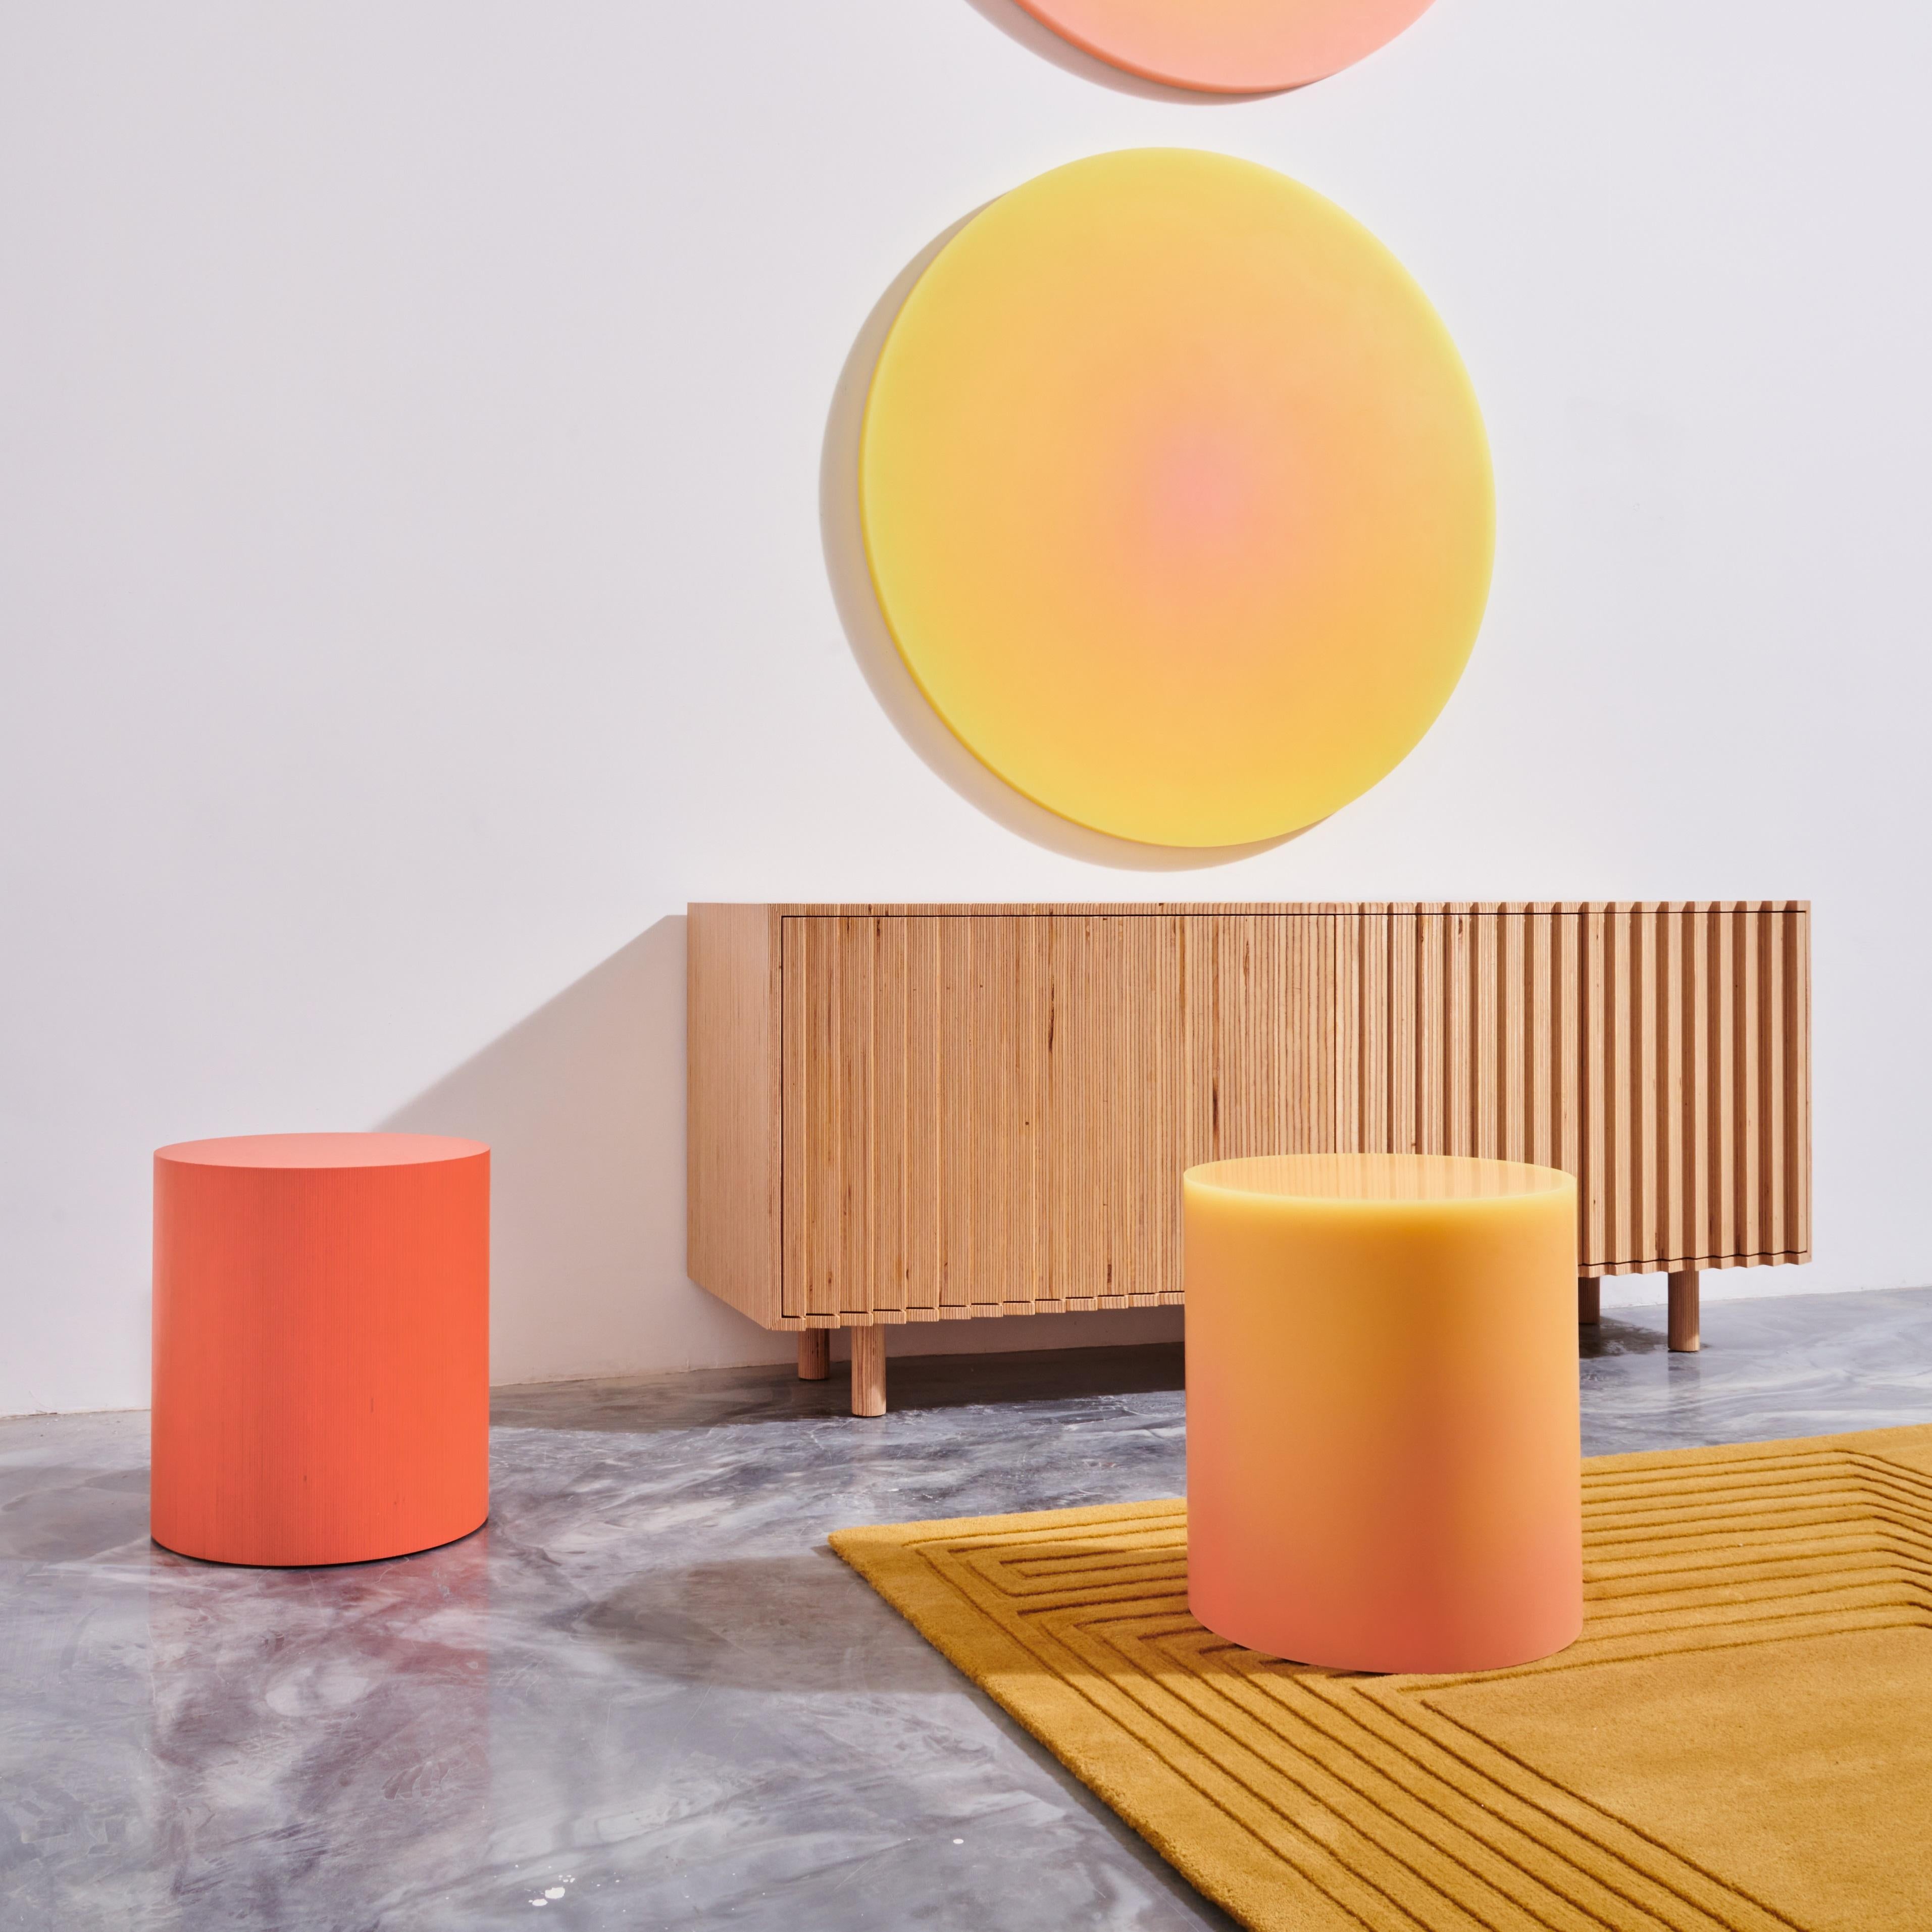 Resin stool in a warm colorway, featuring a matte exterior that generates a mesmerizing visual effect from a medley of gradual saturation shifts along the wavy patterns. The combination of core and resin color determines the overall hue variants of